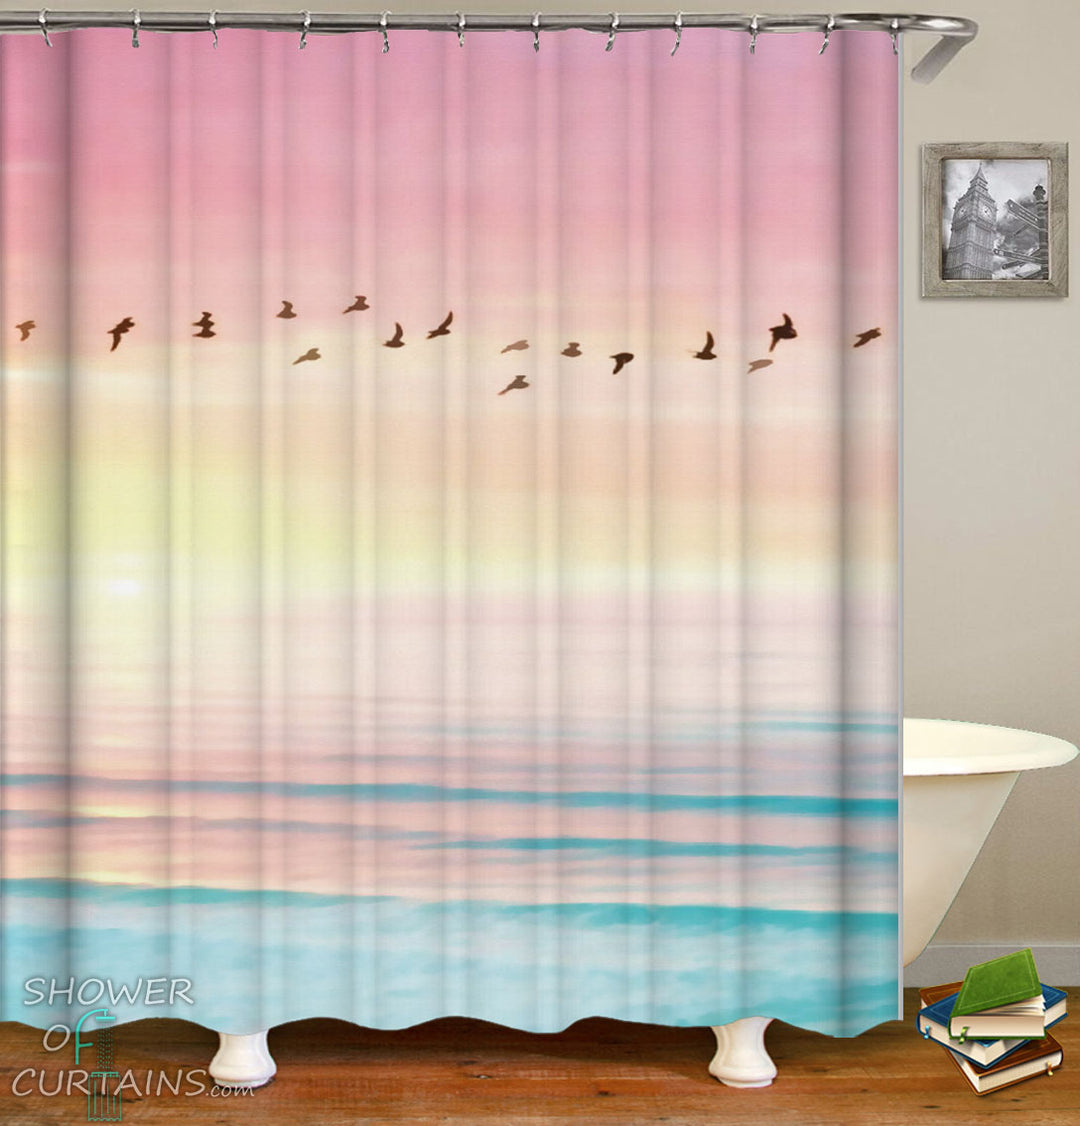 Nature Shower Curtain of Birds Over Purplish Skies And Blue Ocean